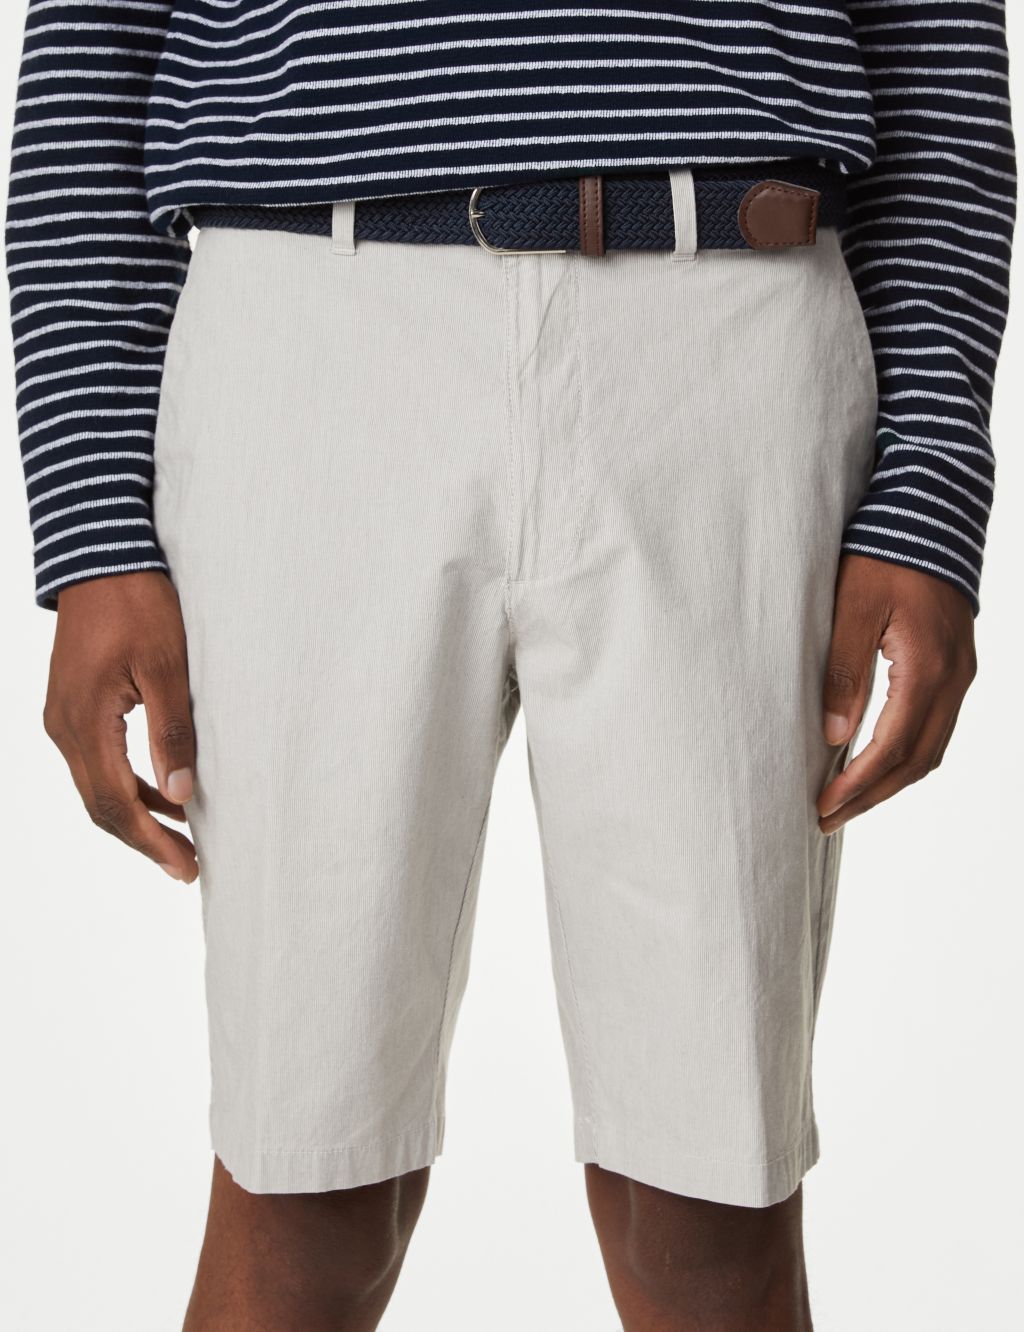 Striped Belted Stretch Chino Shorts image 1